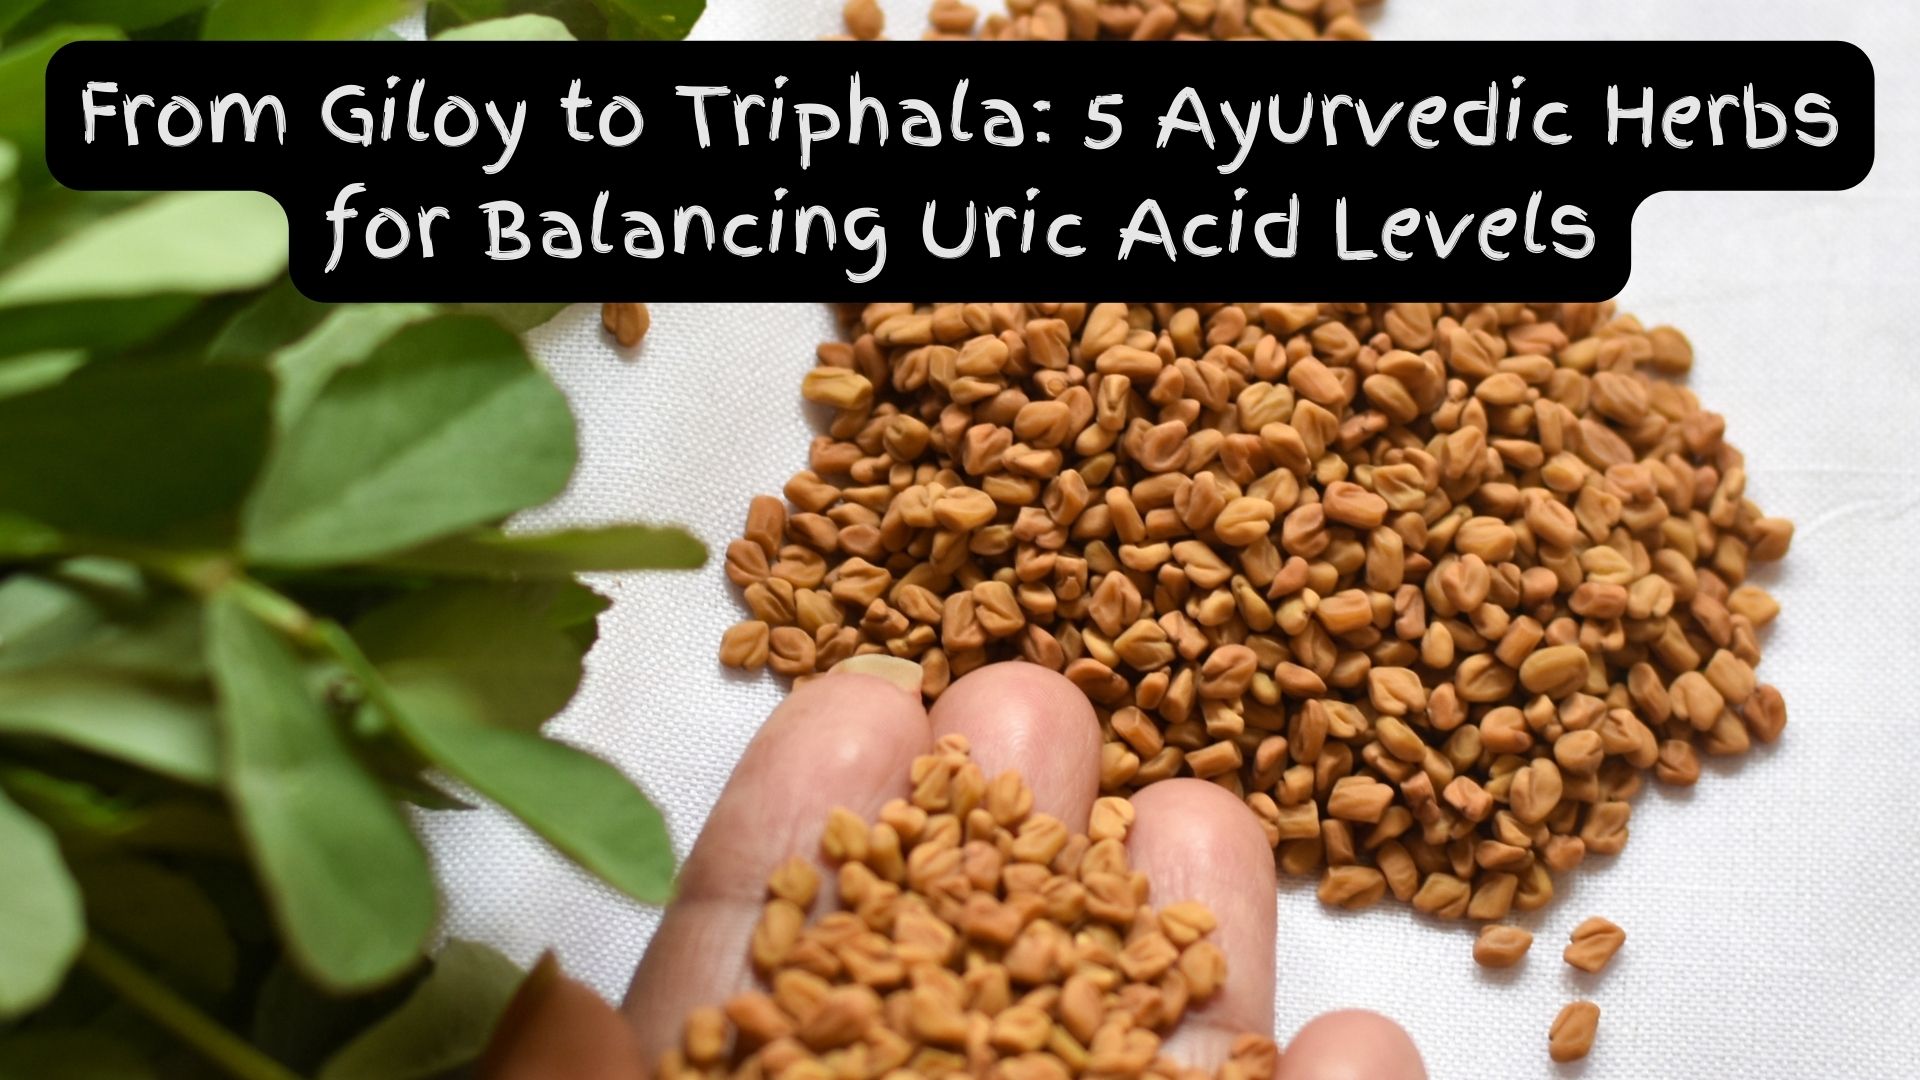 From Giloy to Triphala: 5 Ayurvedic Herbs for Balancing Uric Acid Levels